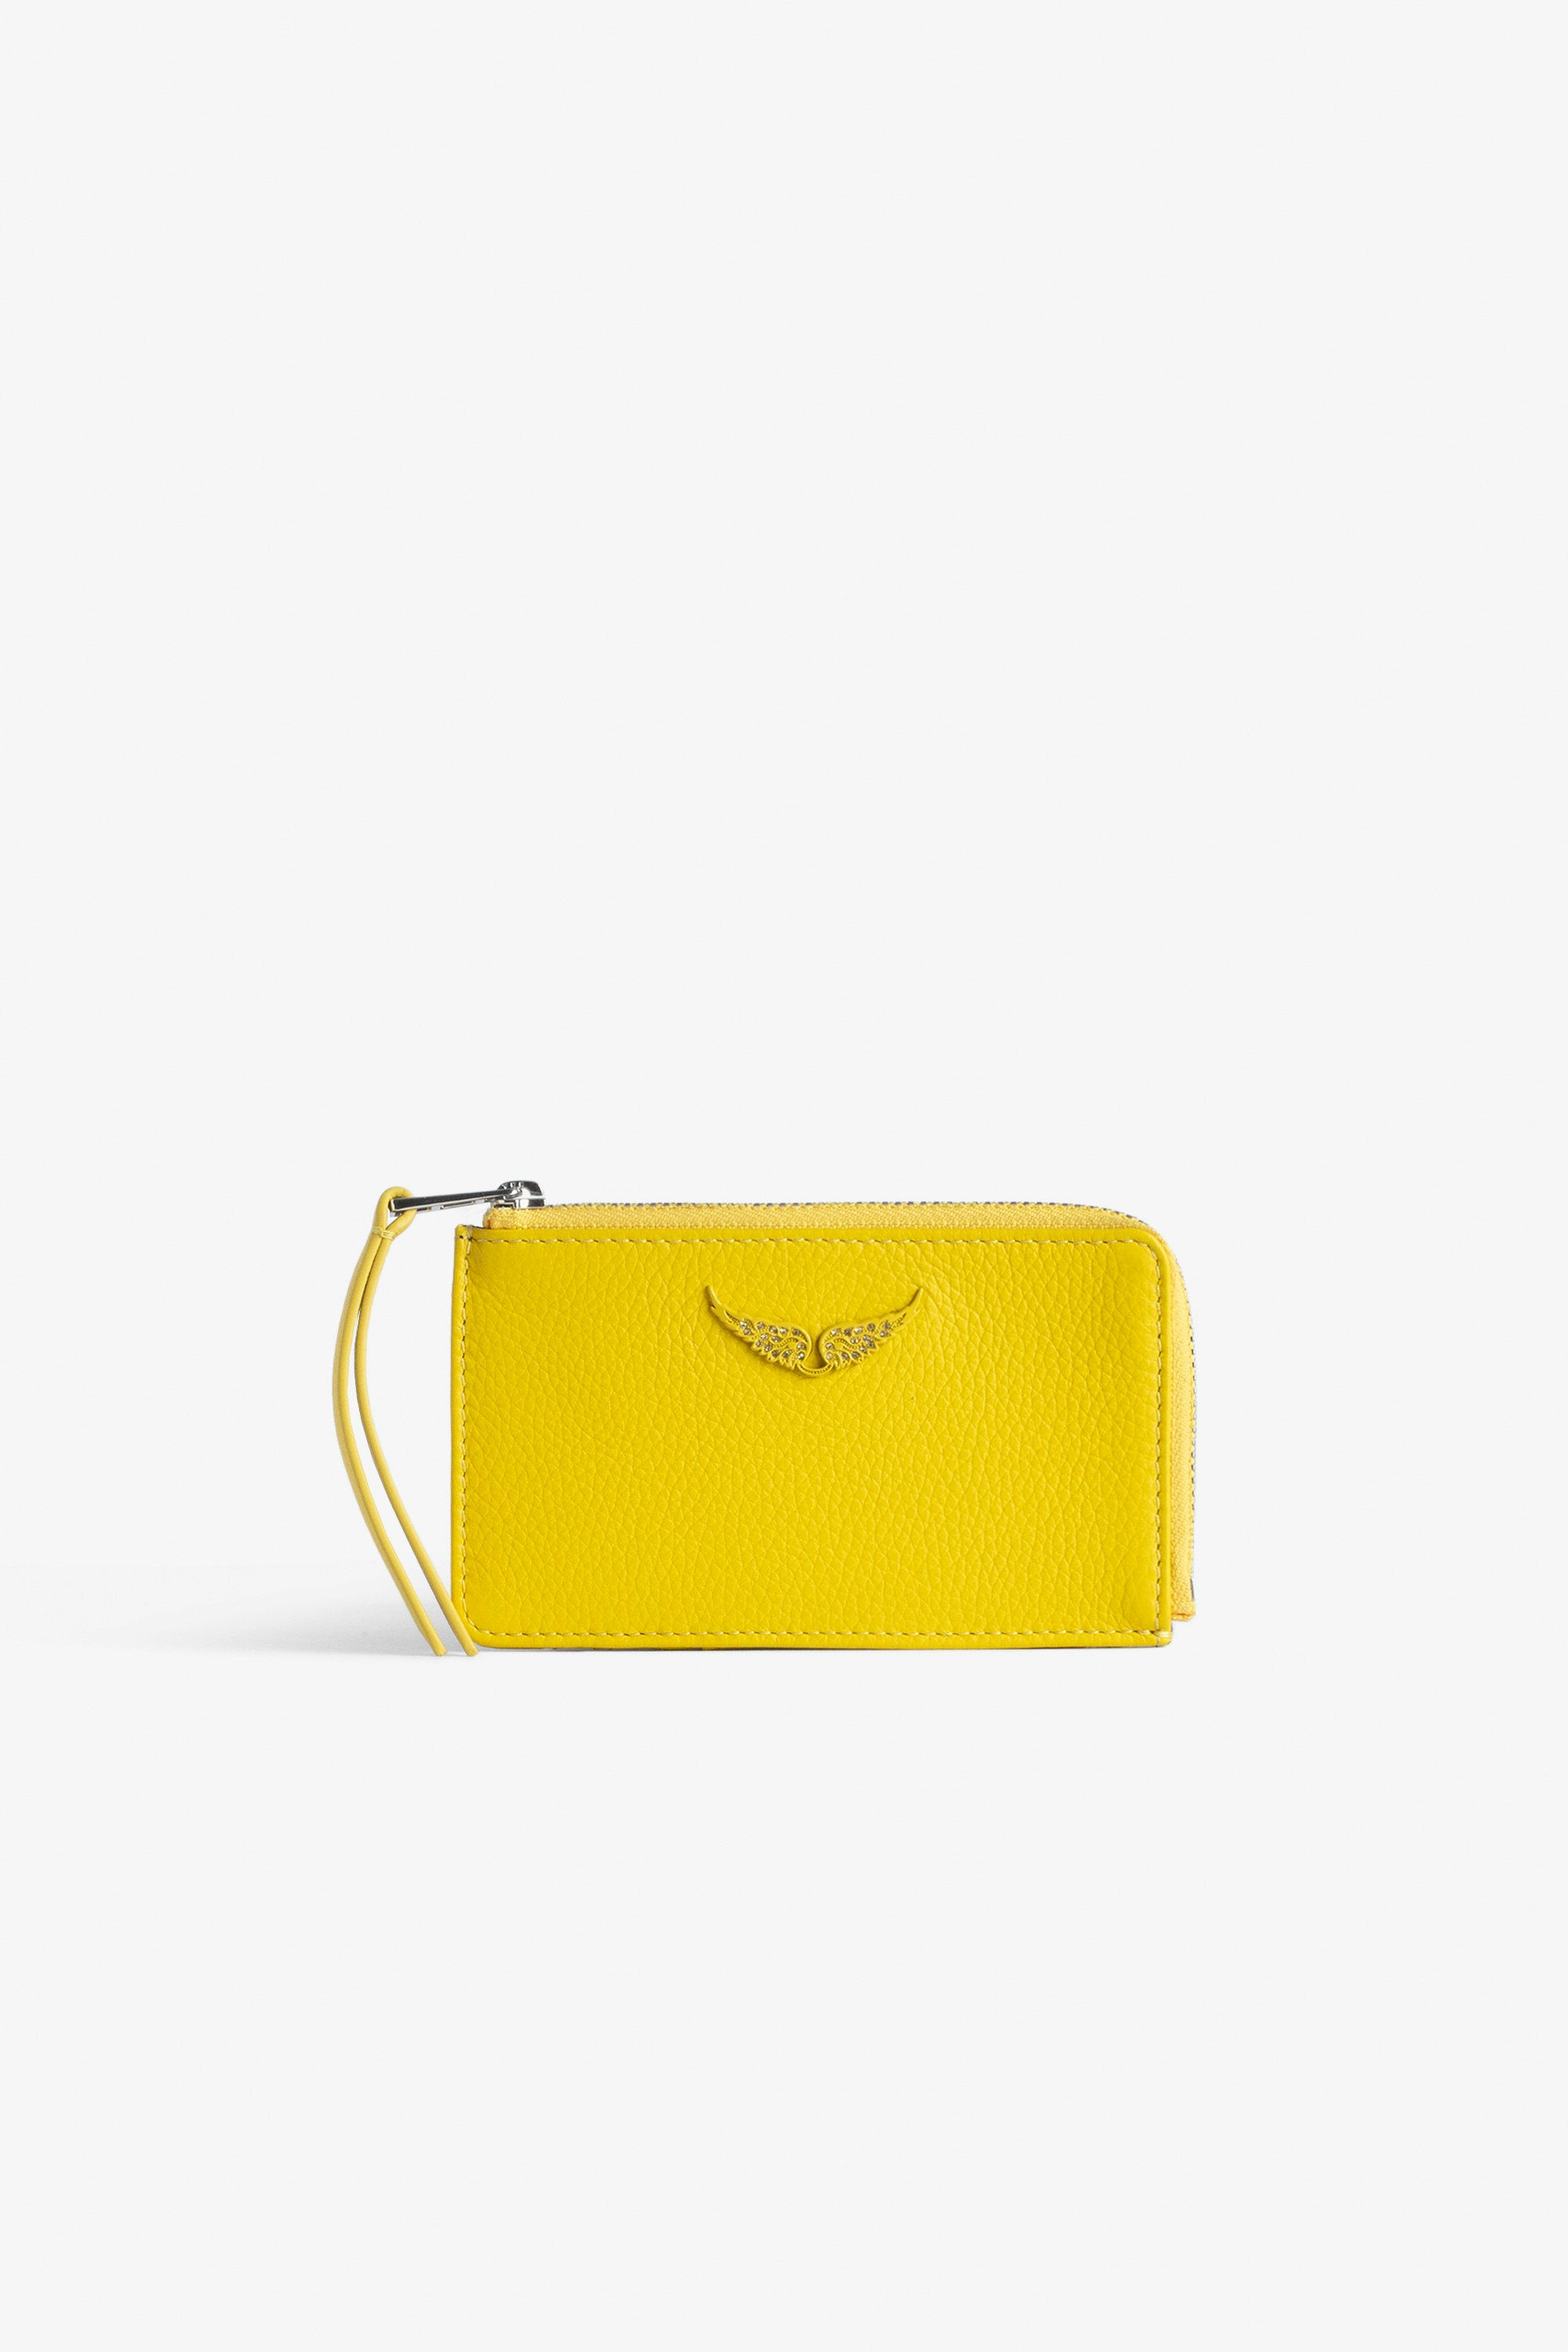 ZV Card Card Holder - Women’s yellow grained leather card holder with wings charm.